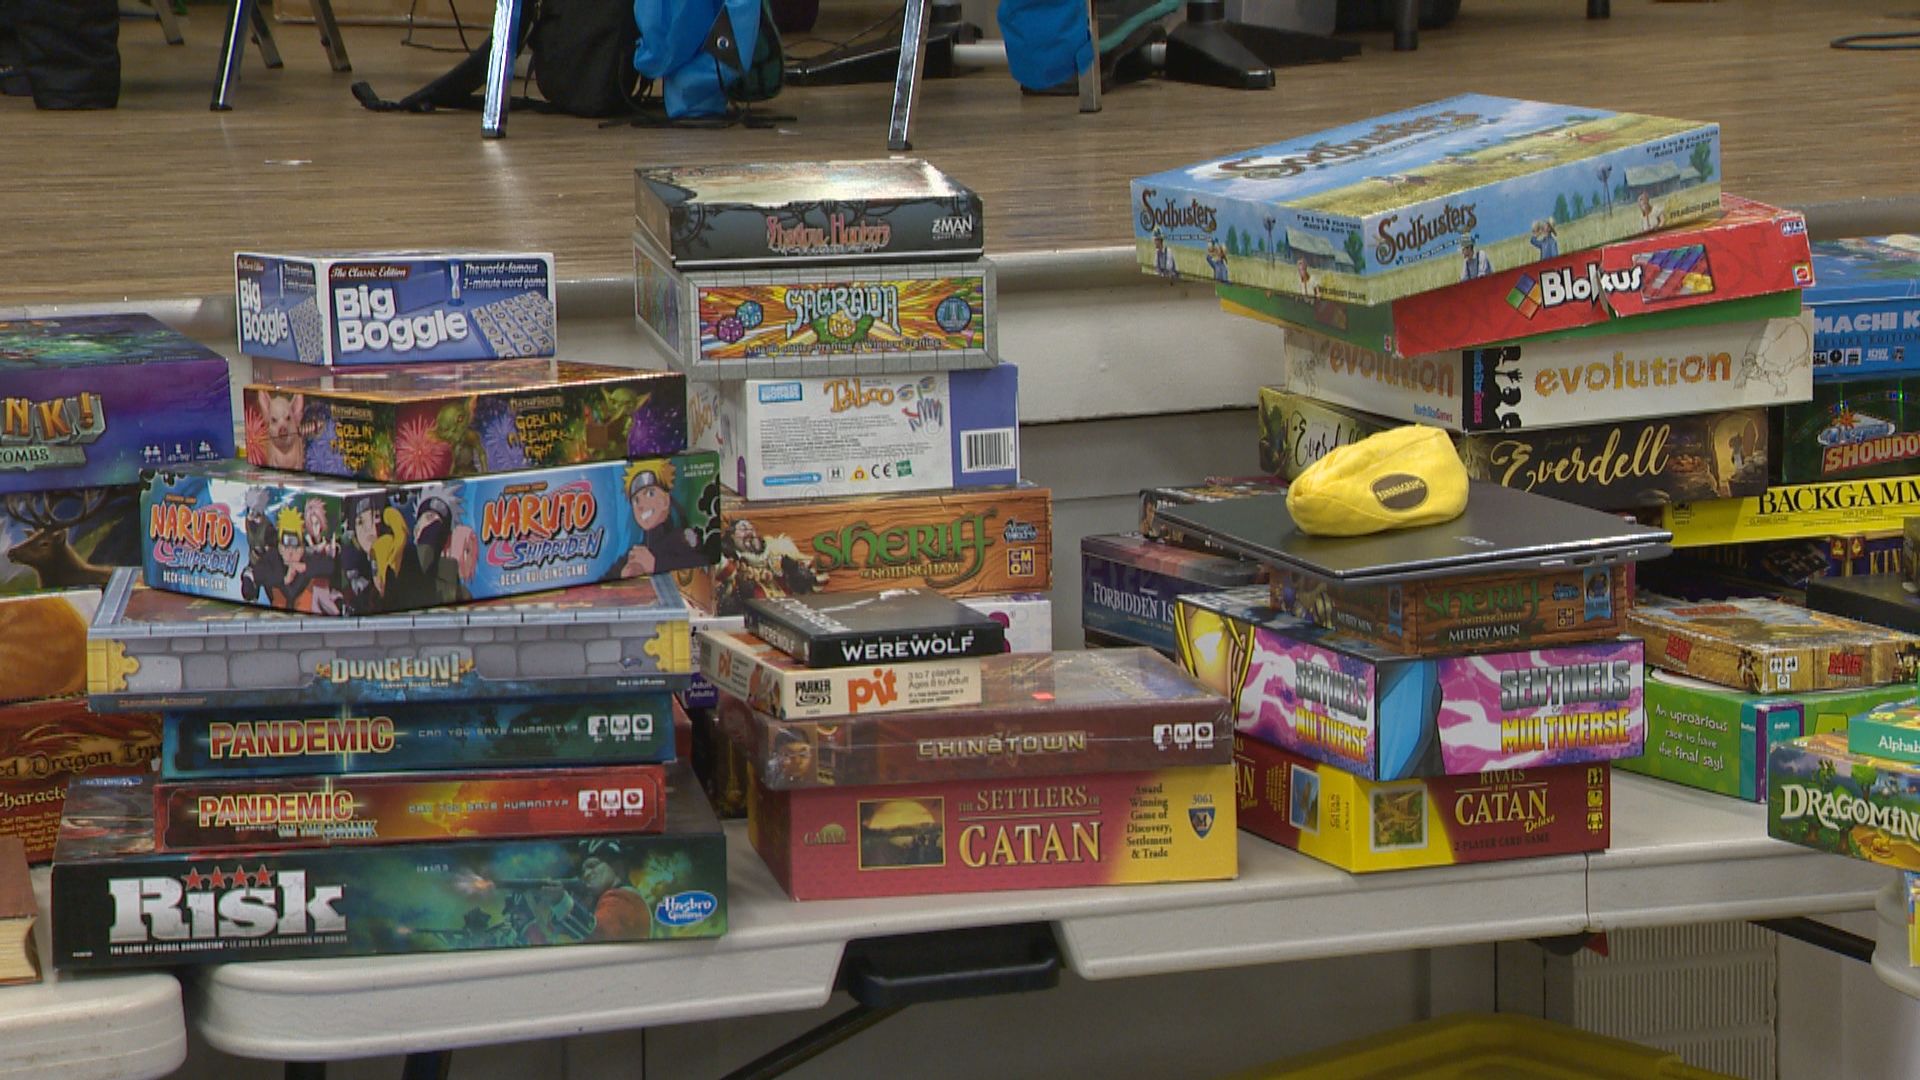 Gamers gather at Extra Life Weekend in Saskatoon to support children’s hospital